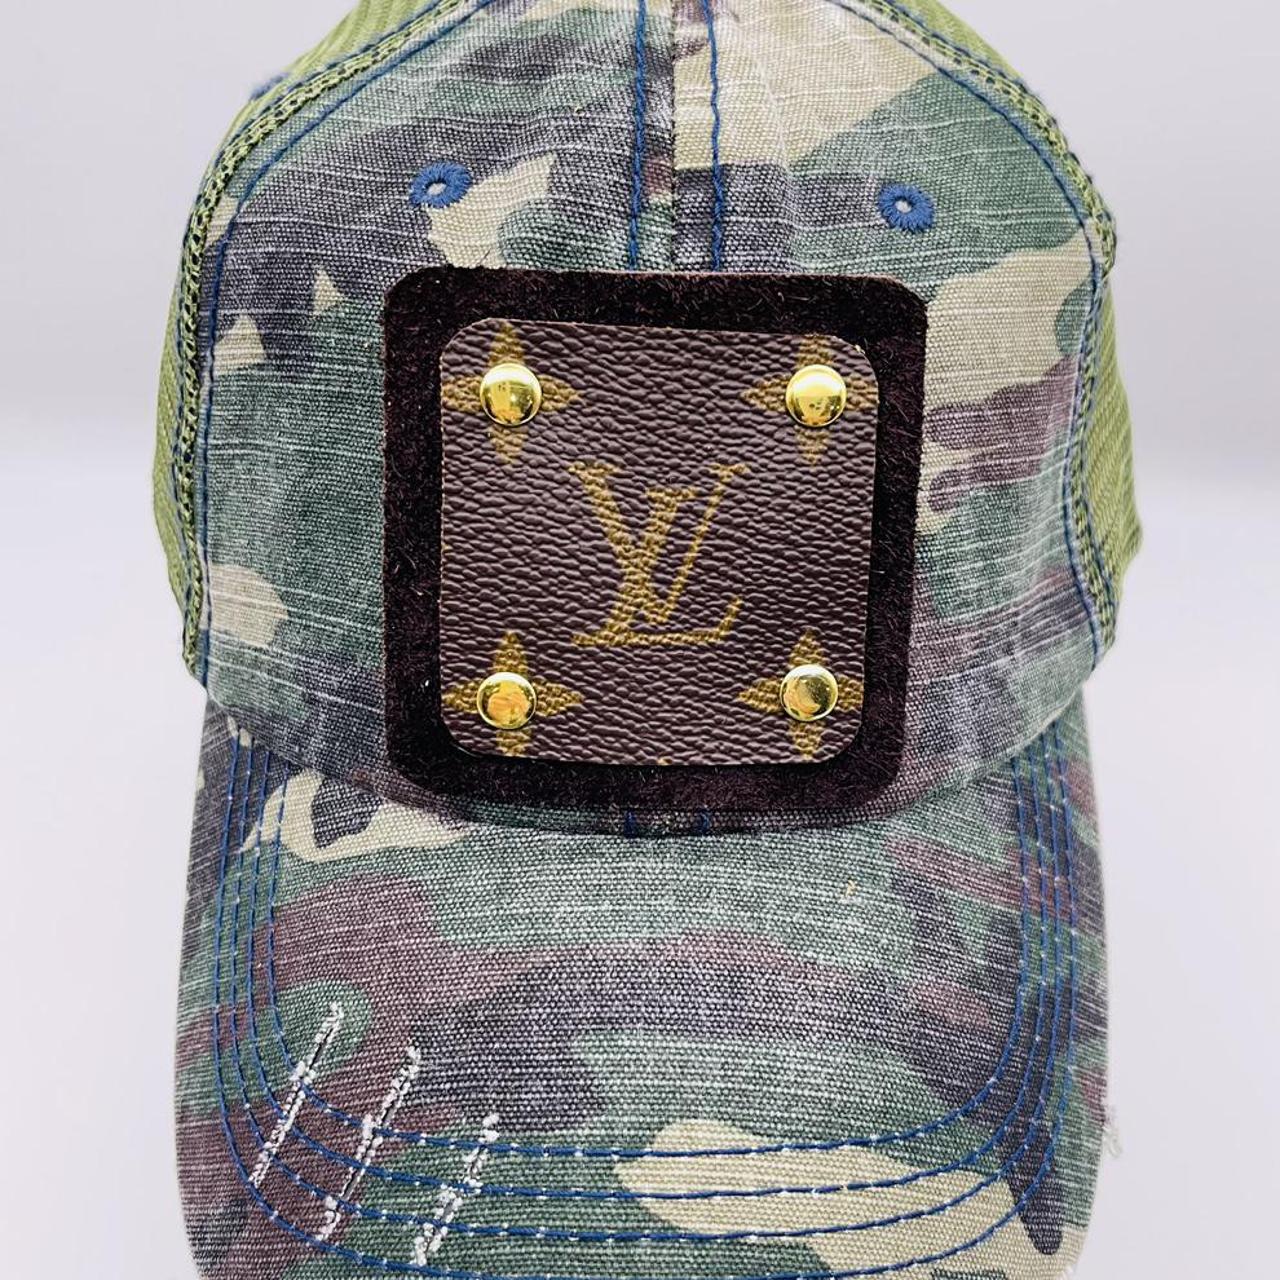 UPCYCLE LV DISTRESSED FOREST CAMO HAT on Sale 